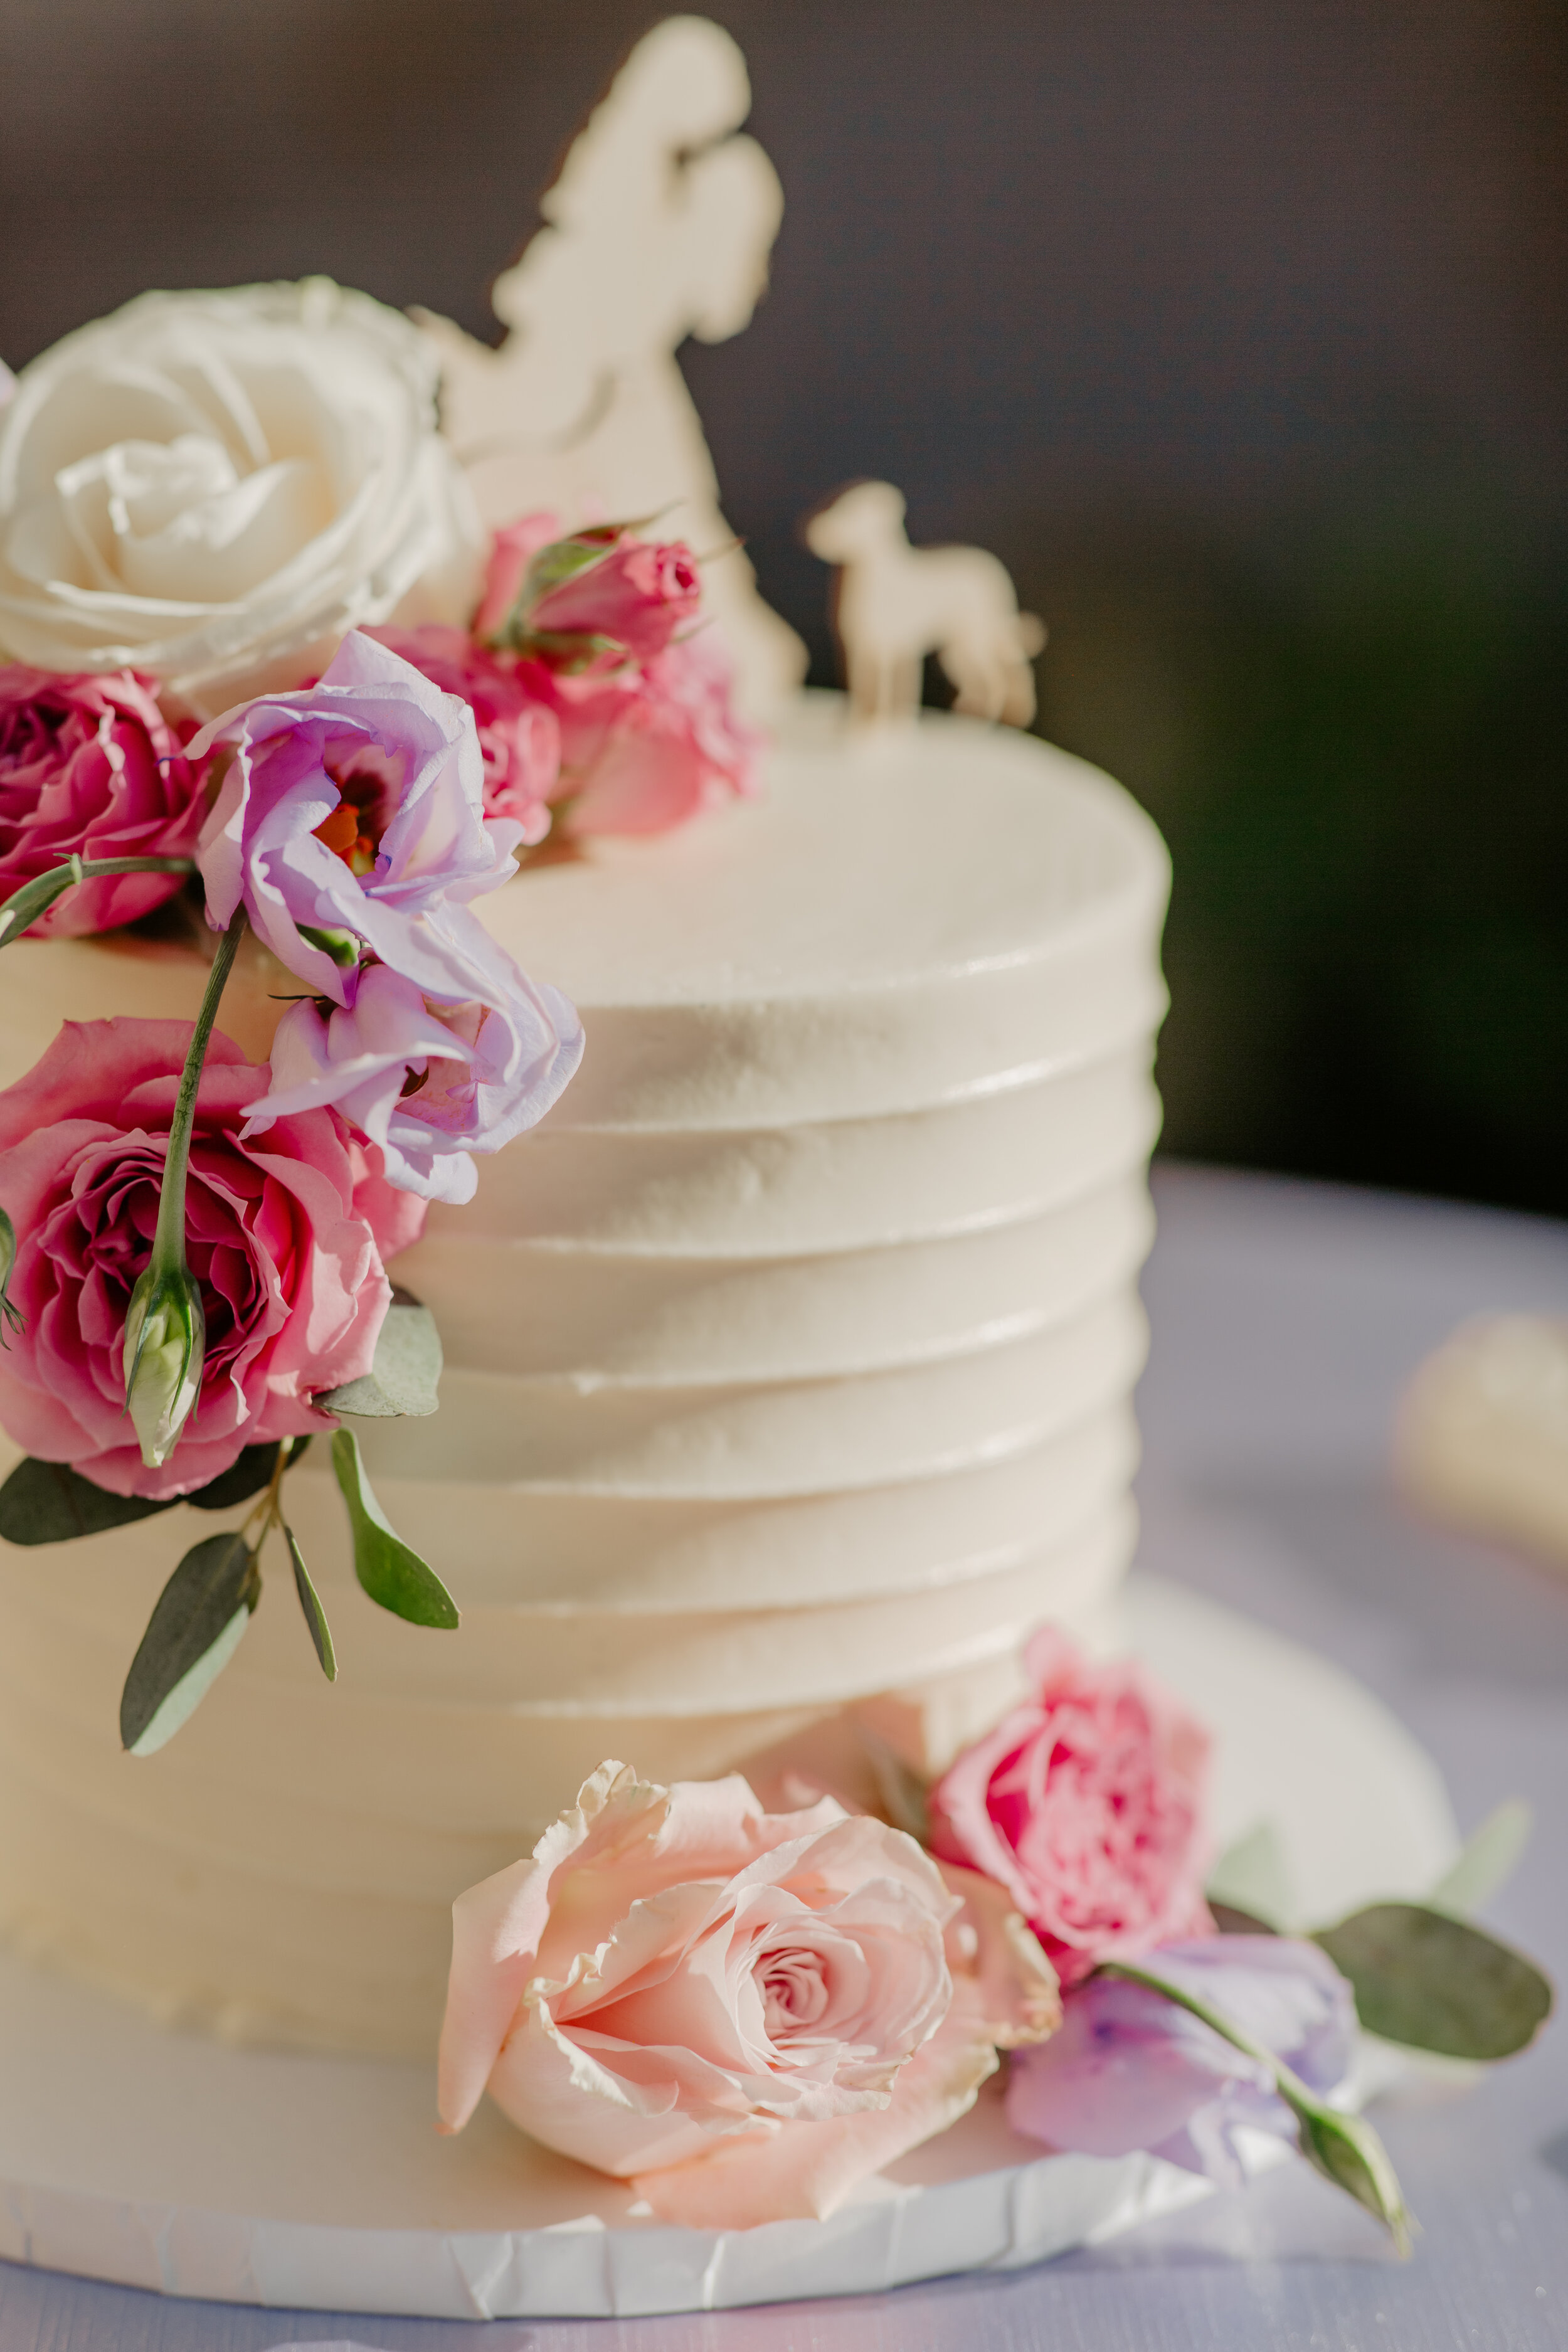 Chicago wedding giveaway with ECBG Cake Studio &amp; Fierce Productions featured on CHI thee WED